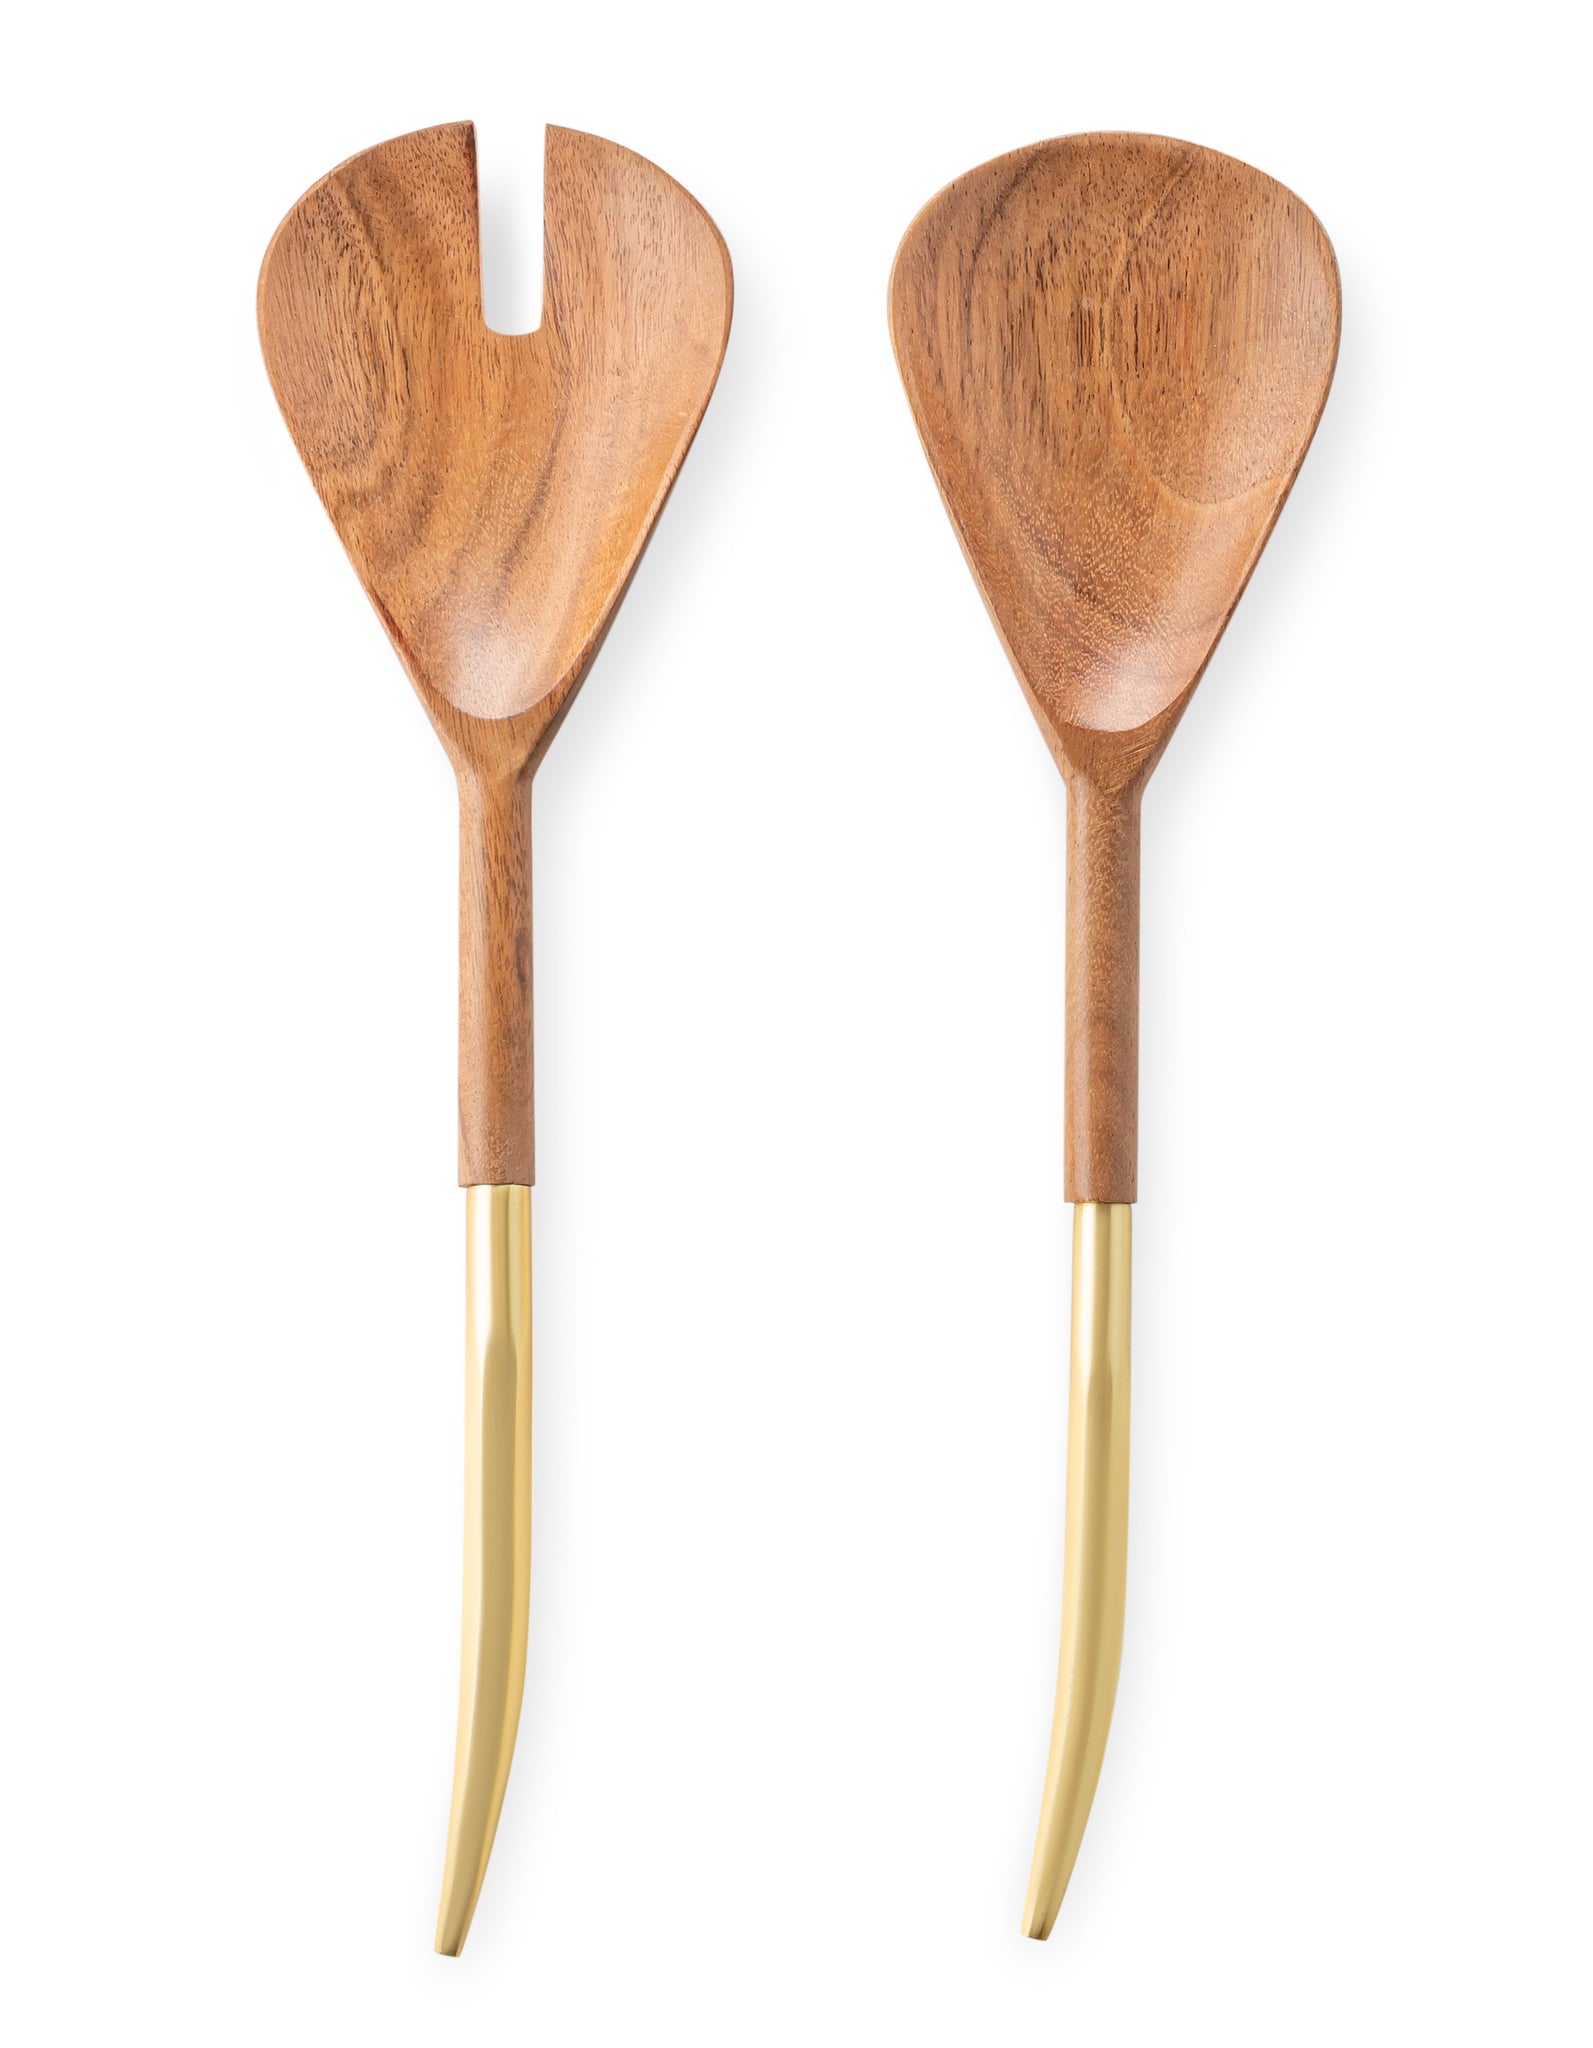 Salad Servers wood and gold + Drink + Truffle Box